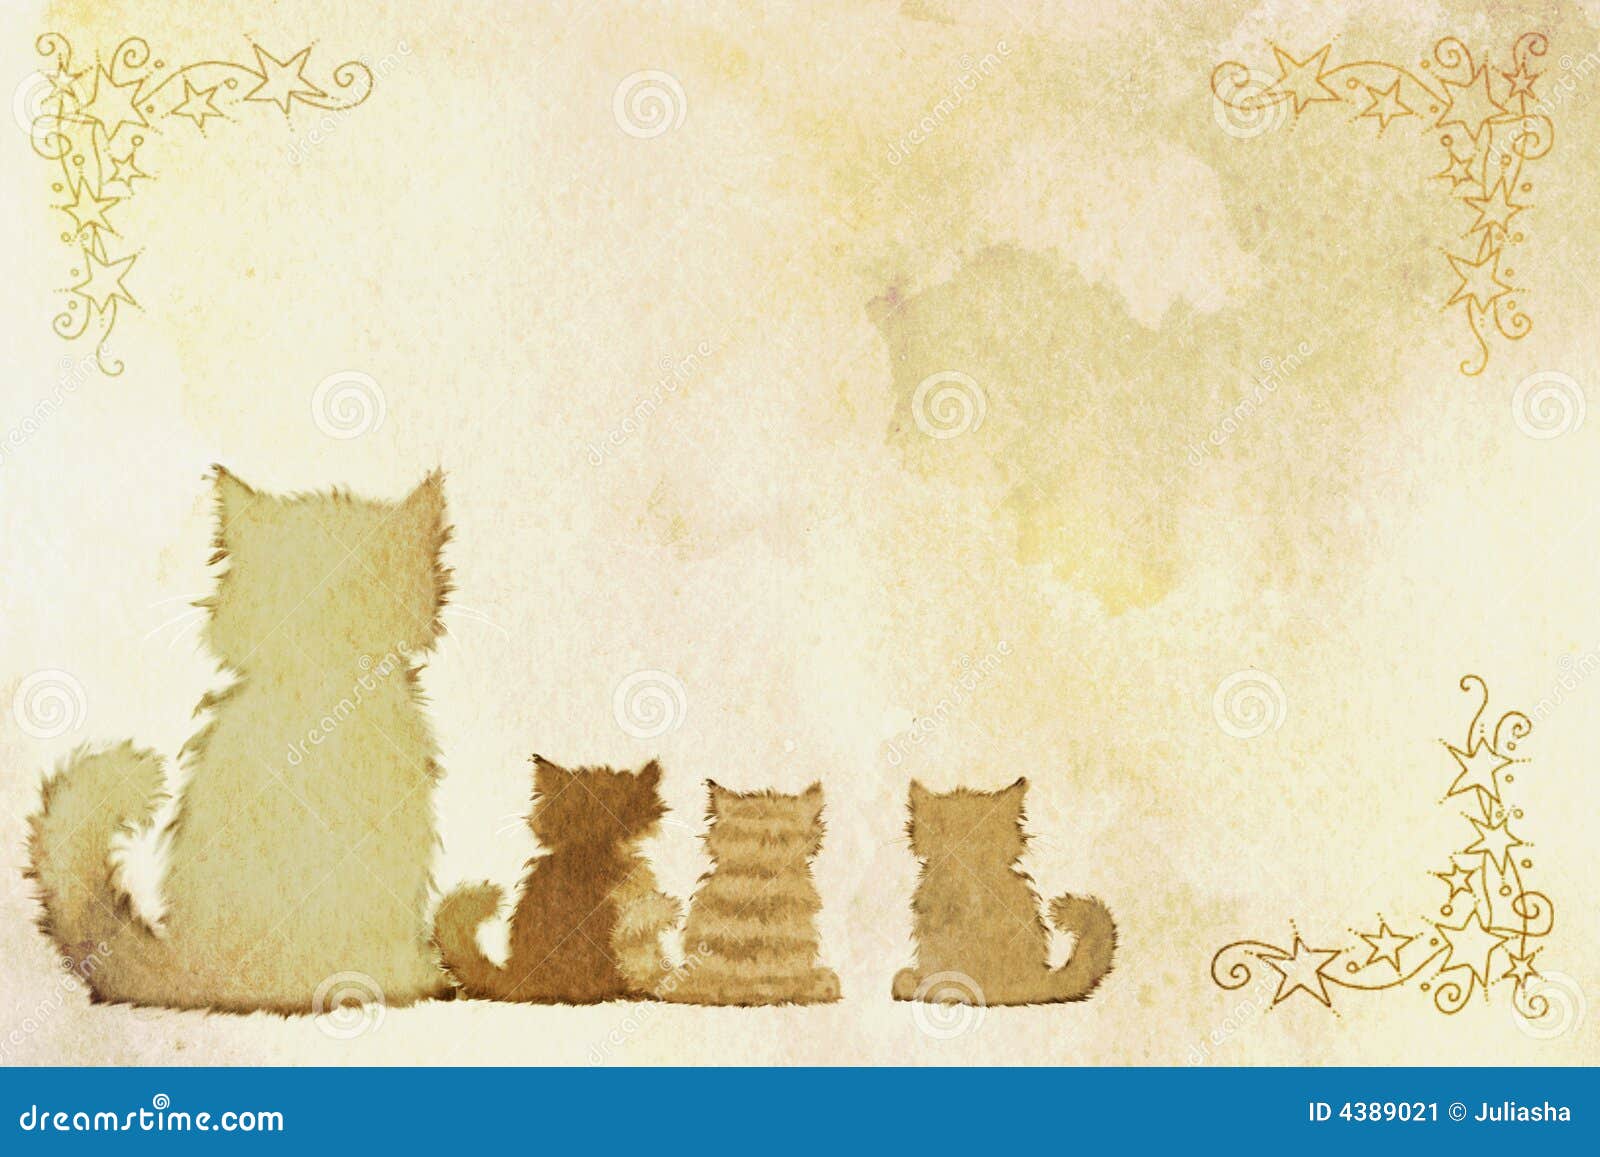 Cats Frame Stock Image - Image: 4389021